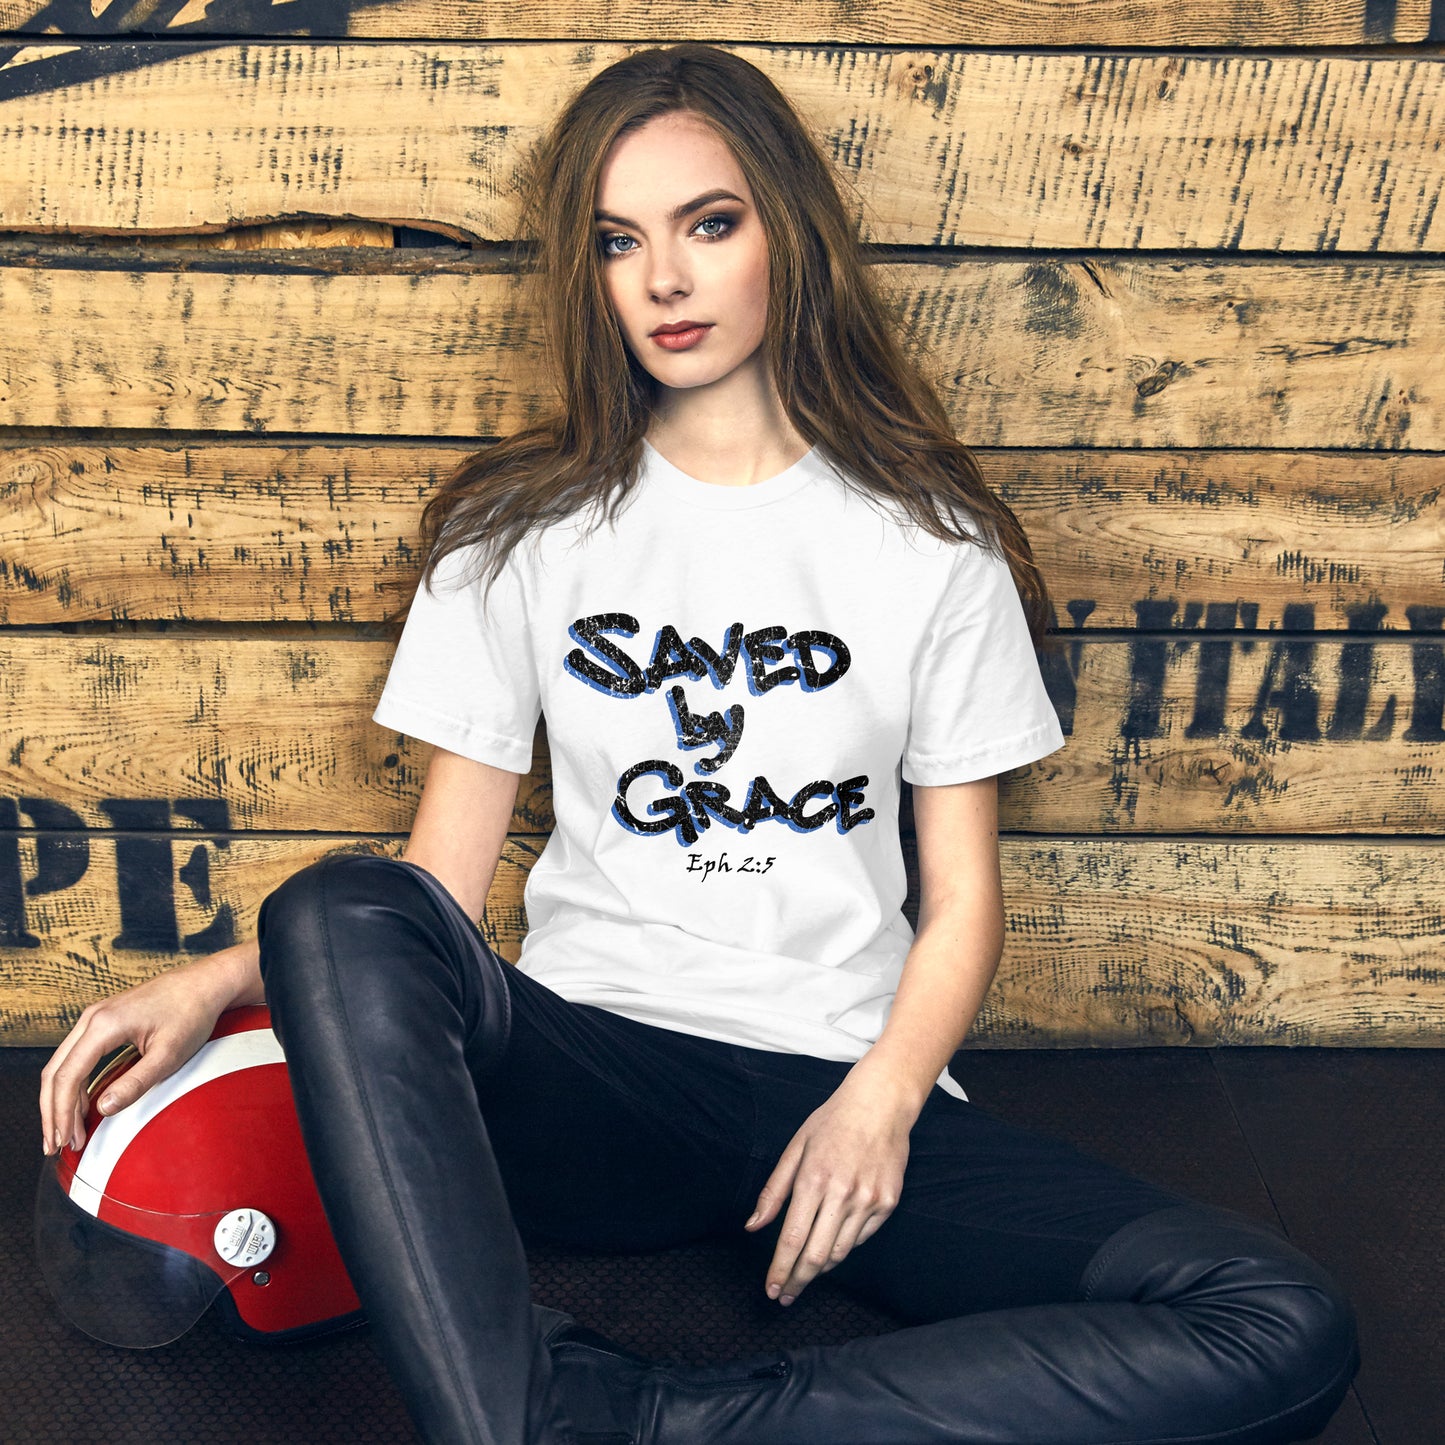 Saved by Grace Grungy-Graffiti Unisex T-shirt - Solid Rock Designs | Christian Apparel